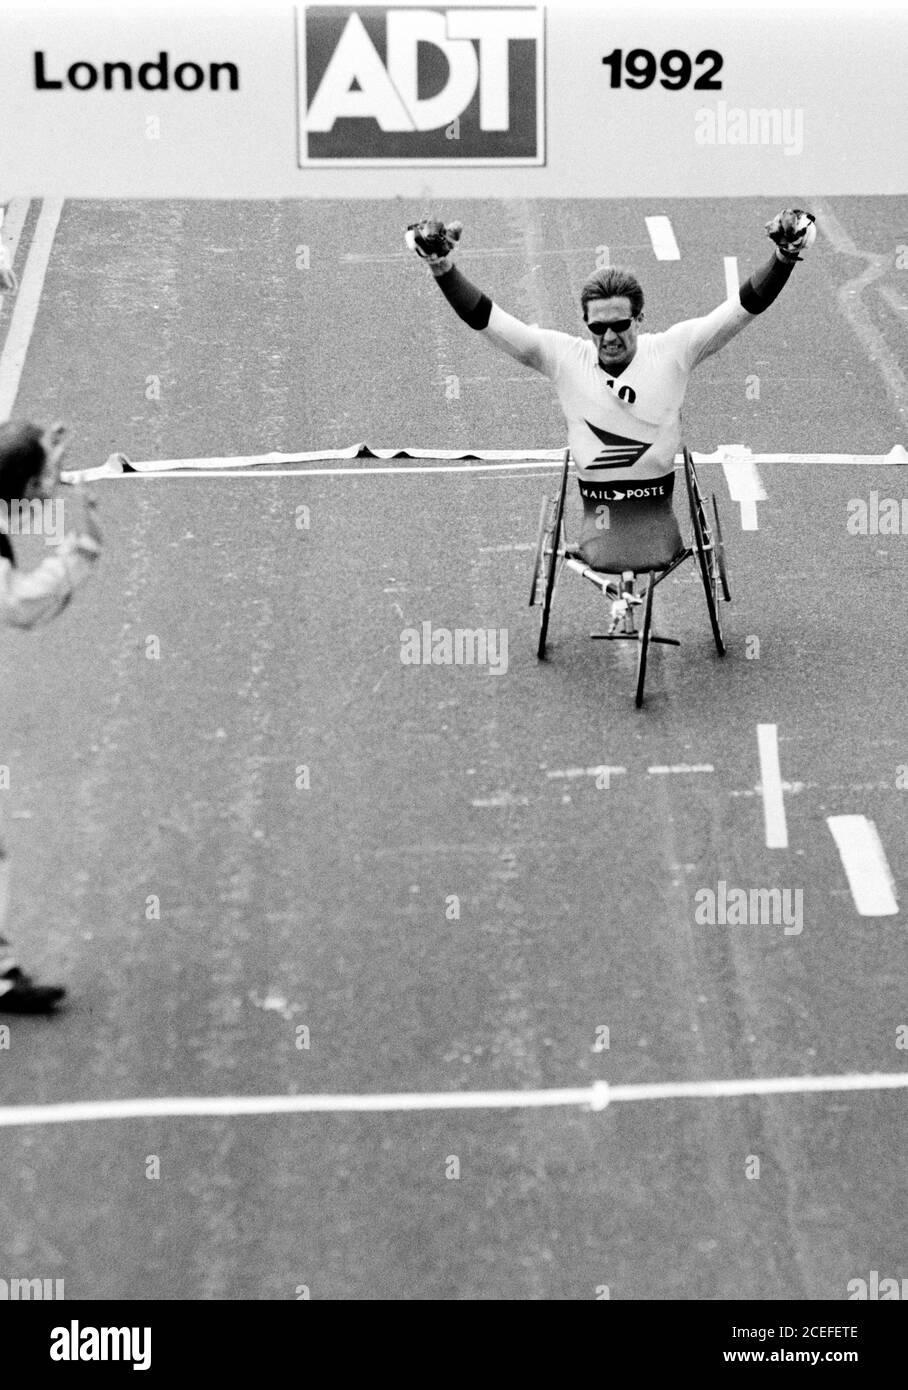 Daniel Wesley (CAN) crosses line to win the Men’s Wheelchair race at the ADT London Marathon on Westminster Bridge, London. 12 April 1992. Photo: Neil Turner Stock Photo